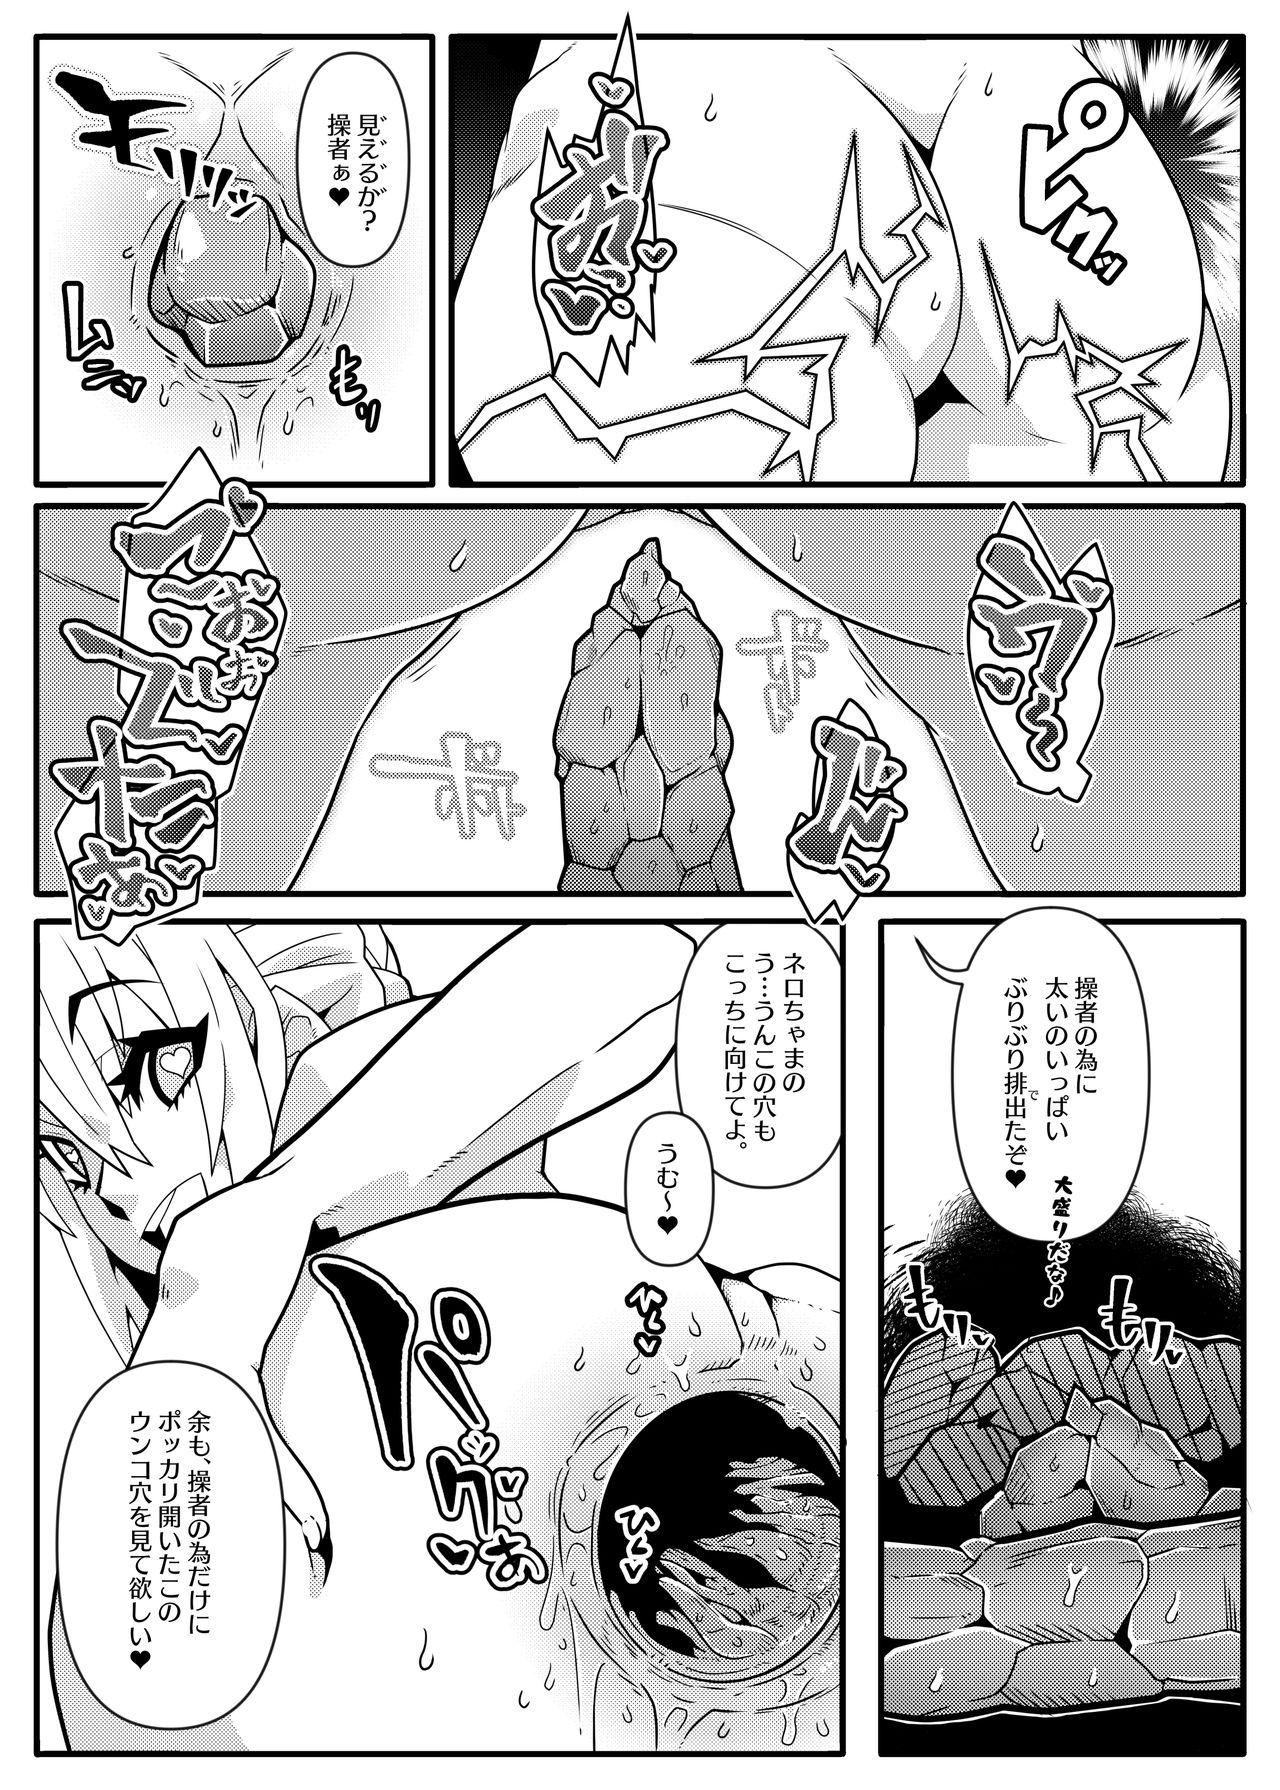 Staxxx MIND CONTROL GIRL 14 - Fate grand order Alt - Page 9